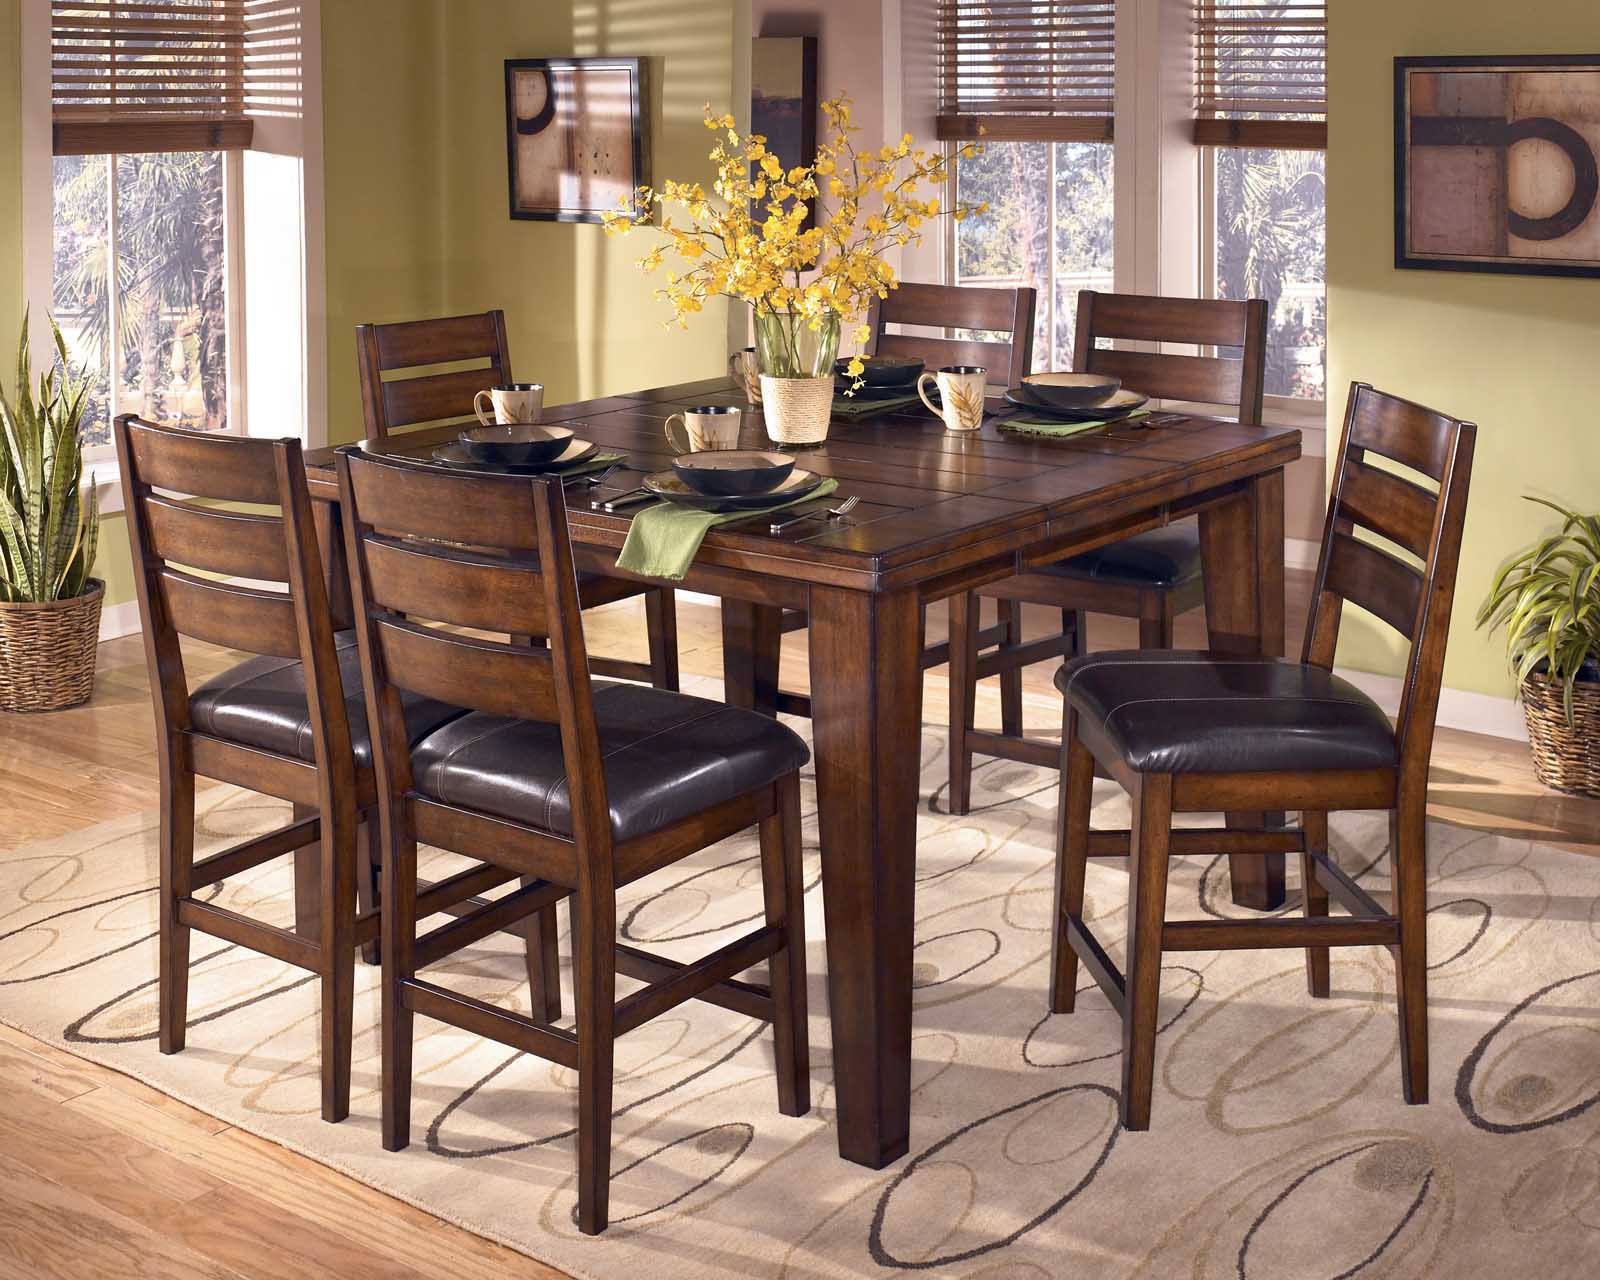 Counter Height Dining Table with Butterfly Leaf counter height dining sets butterfly leaf ECKUPTT